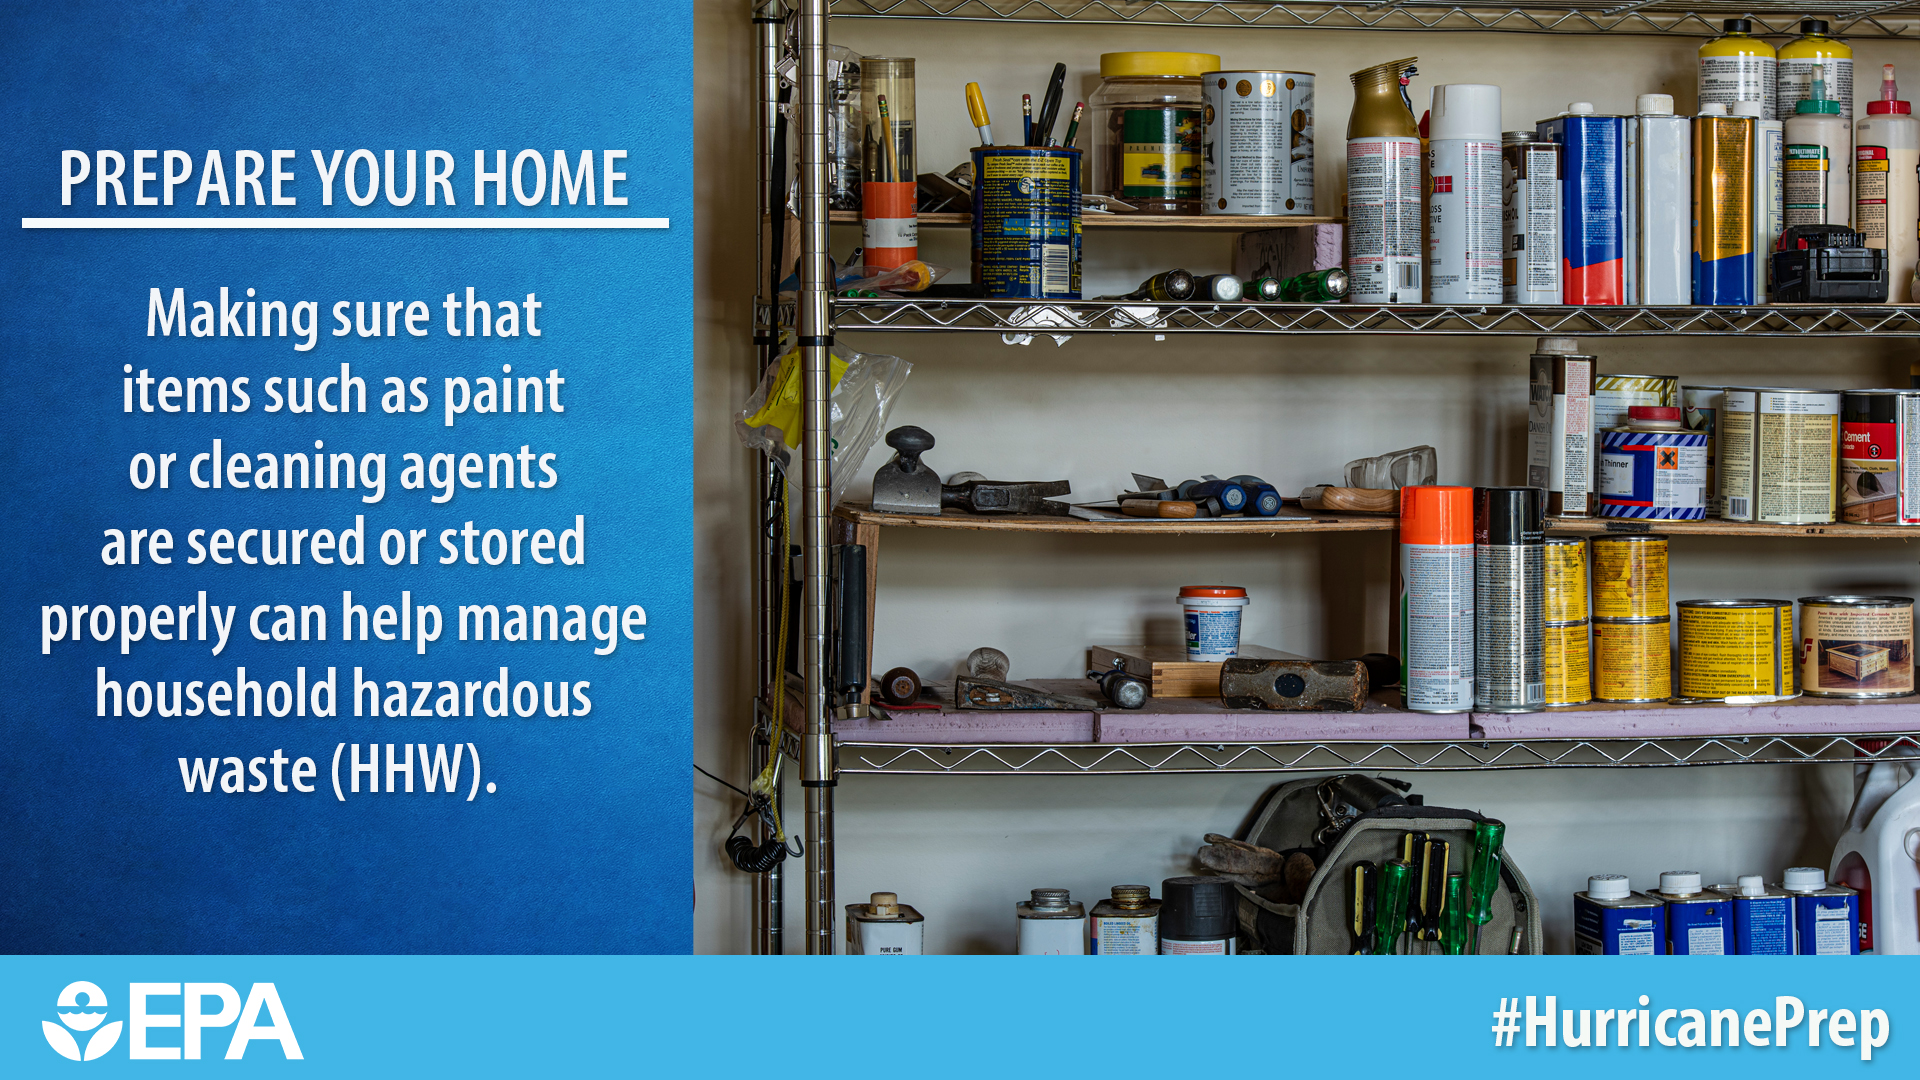 Prepare your home. Making sure that items such as paint or cleaning agents are secured or stored properly can help manage household hazardous waste (HHW).